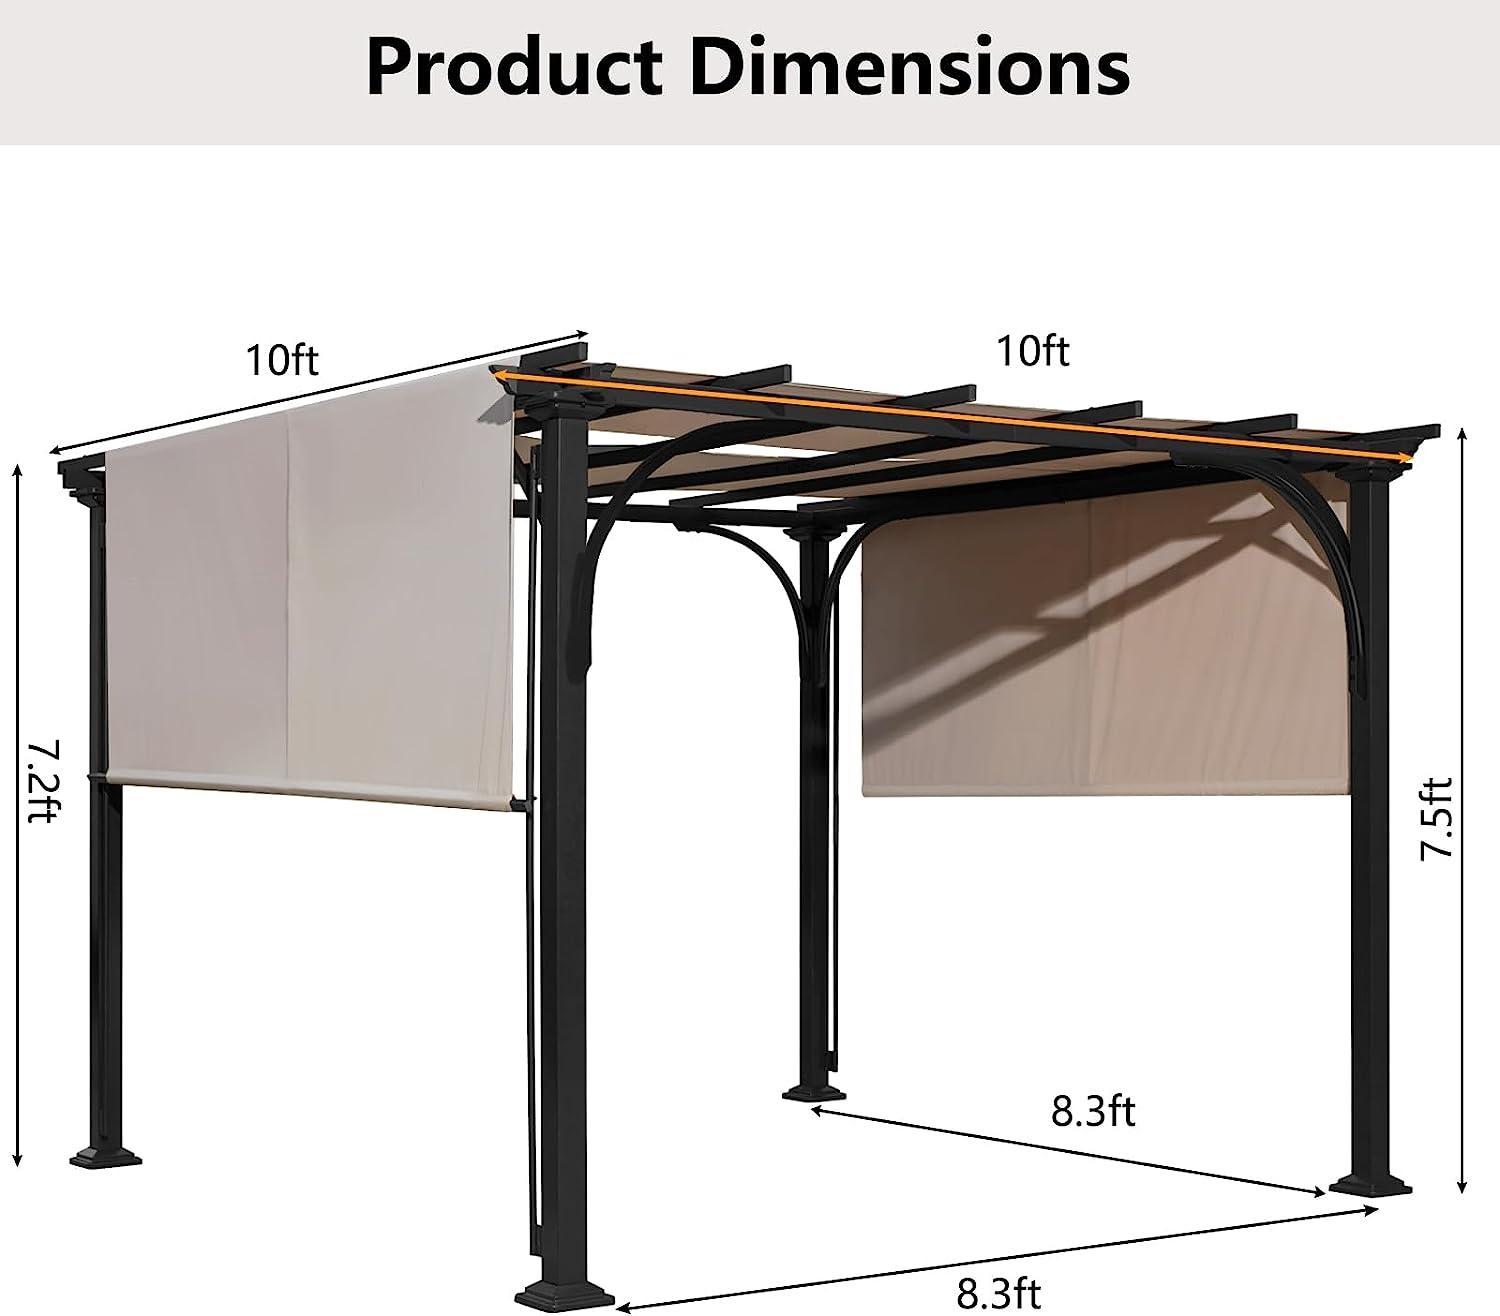 LazyRella™ 10x10ft Extra-Large Outdoor Pergola, Patio Shelter w/Retractable Sun Shade Canopy Cover, Weather-Resistant Fabric - Lazy Pro